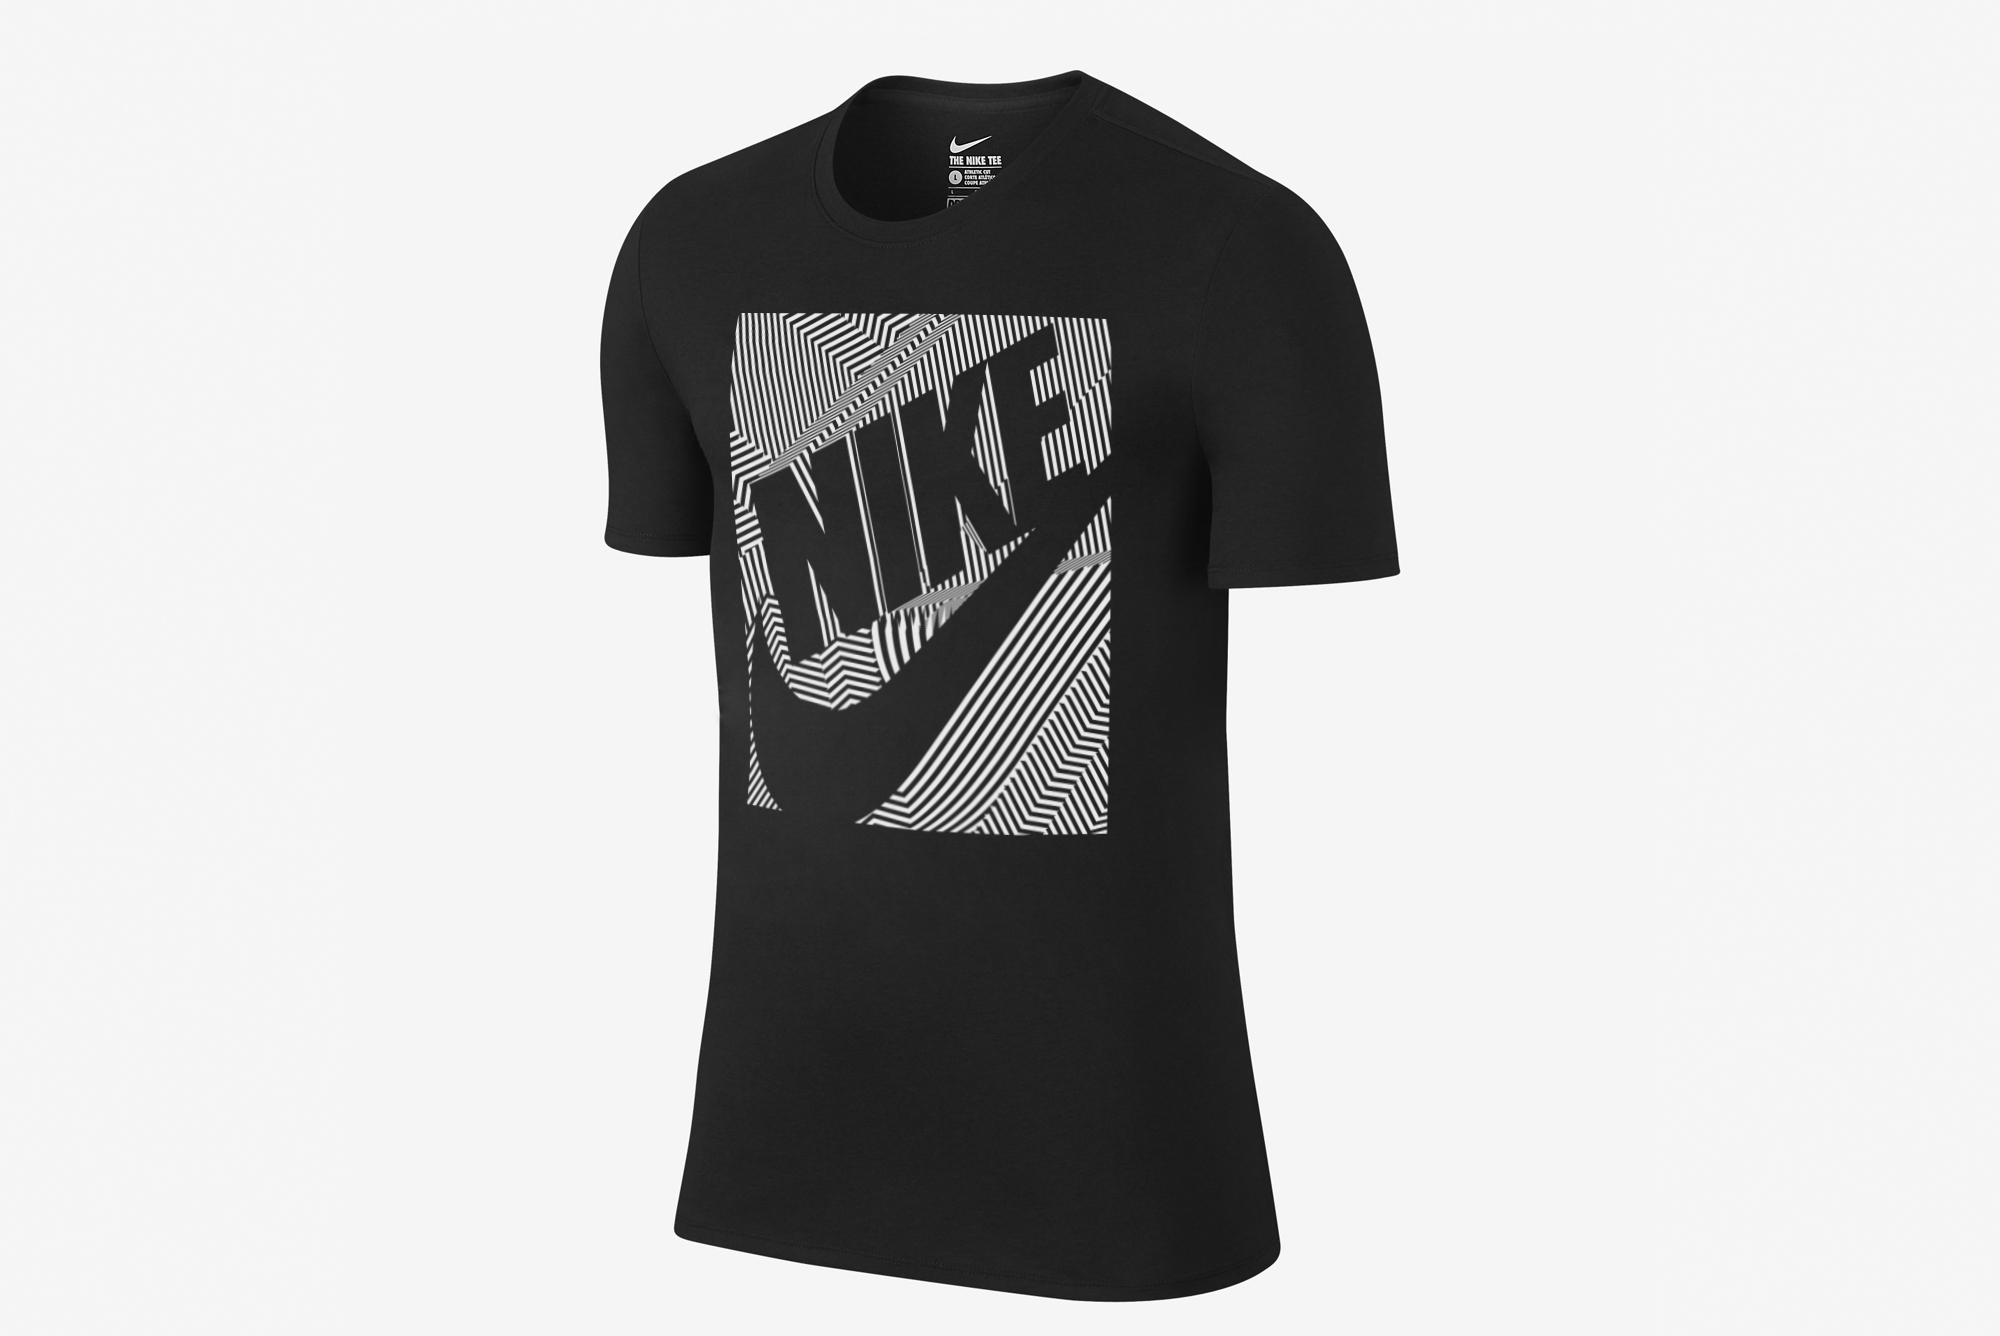 Nike SS16 T-shirts Fonts In Use